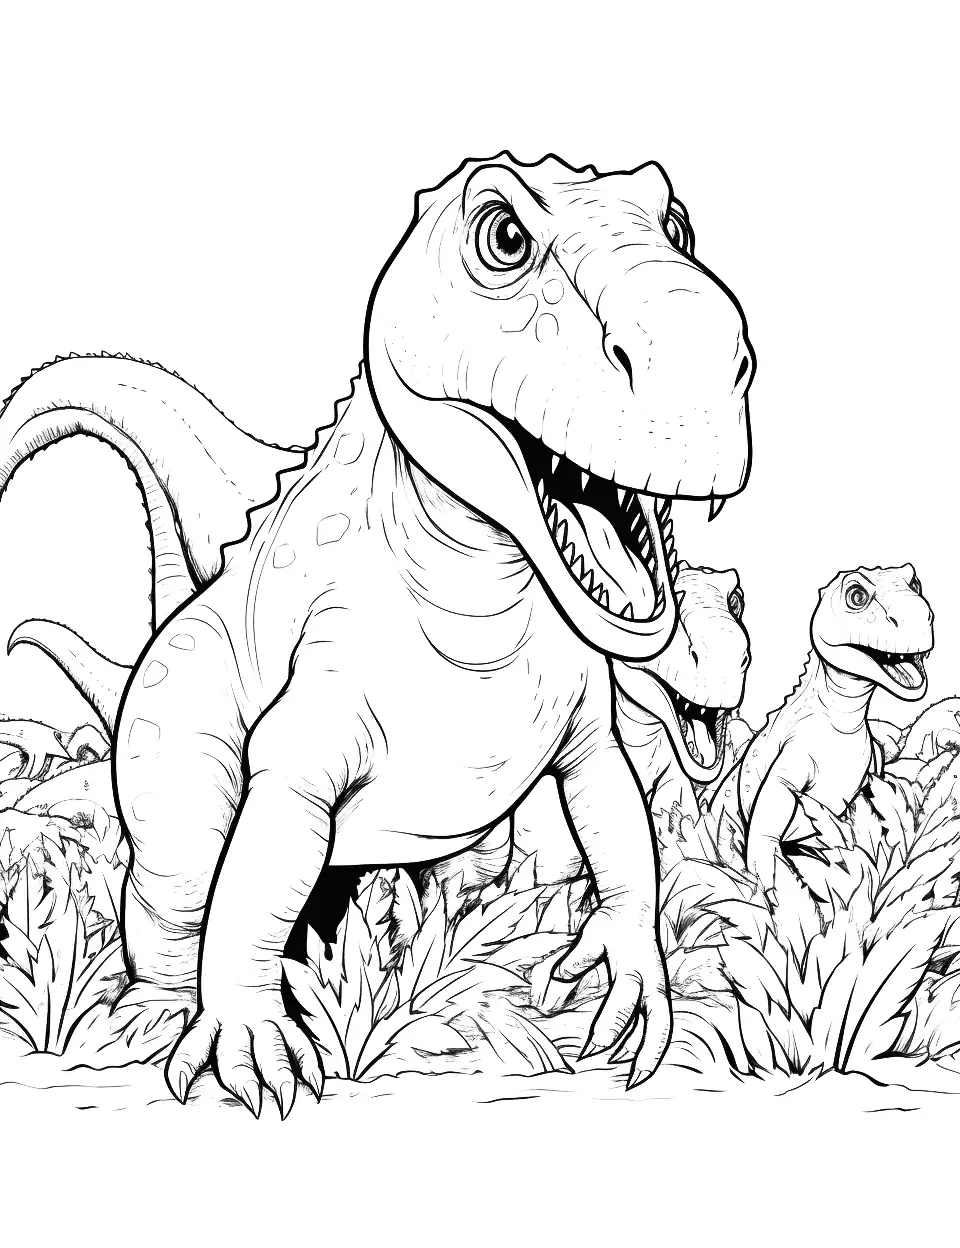 Velociraptor Hunting Dinosaur Coloring Page - A pack of Velociraptors coordinating a hunt.